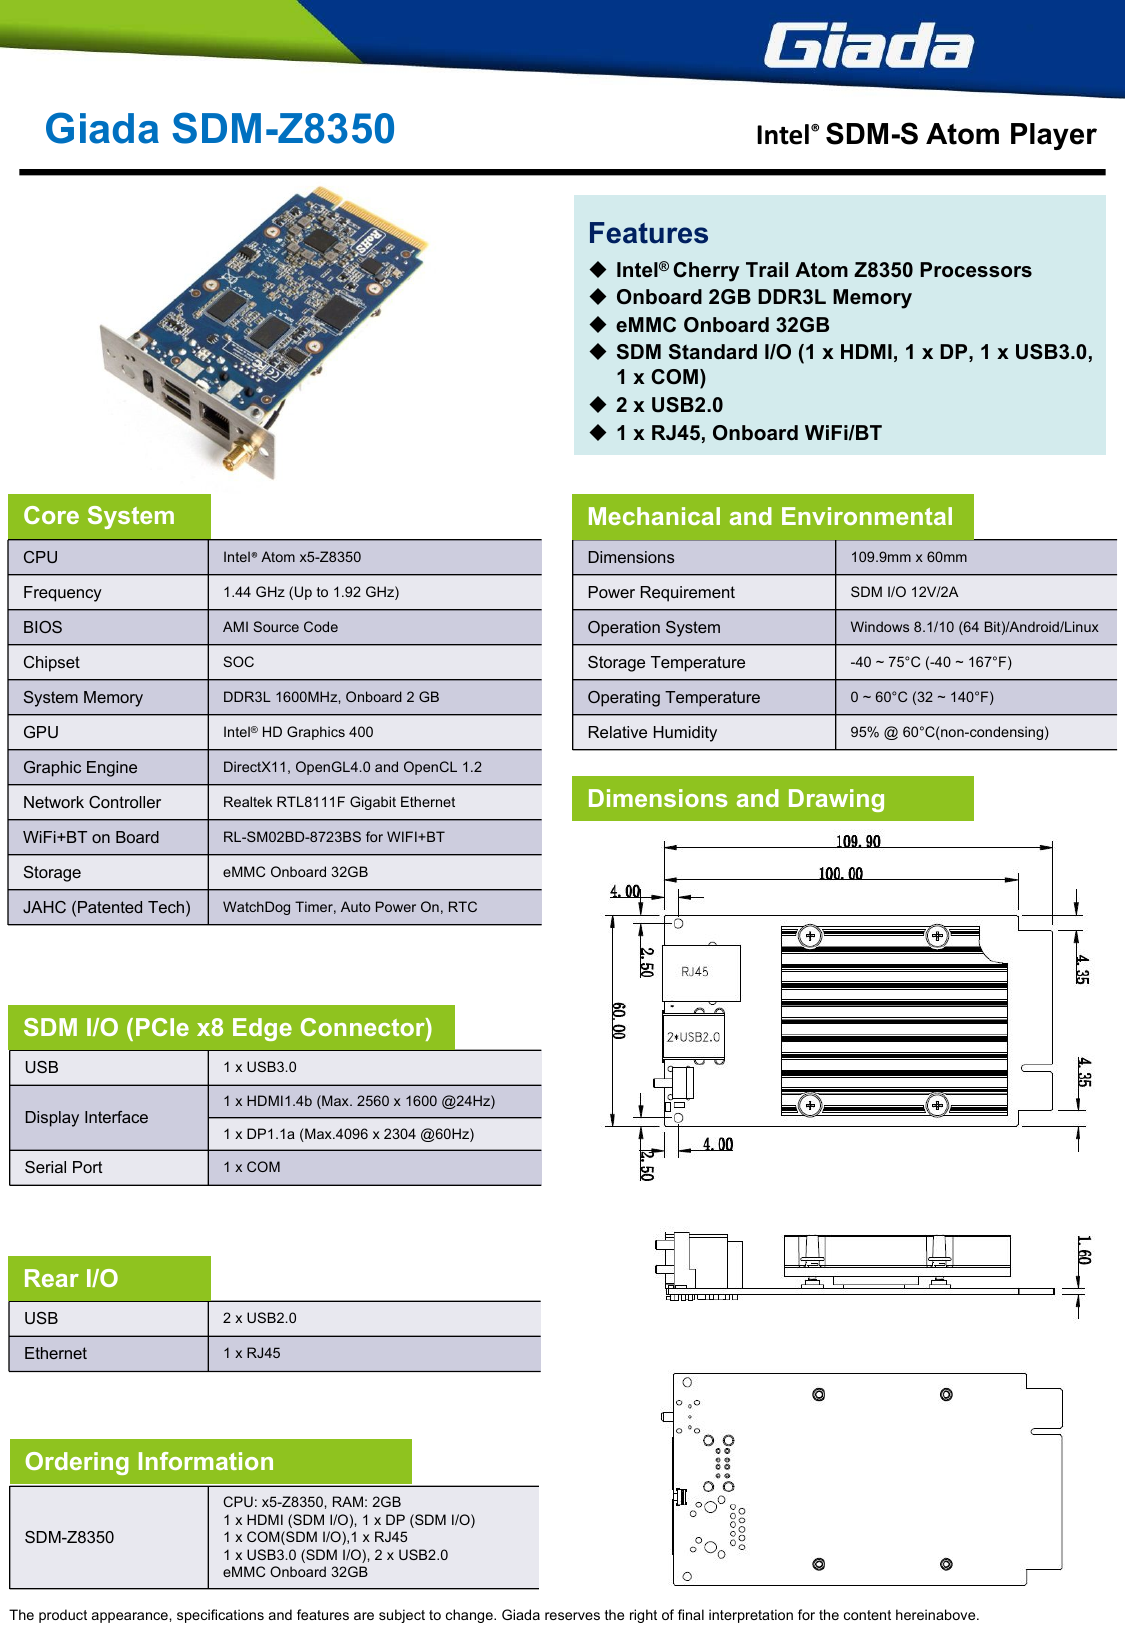 CPUIntel® Atom x5-Z8350Frequency1.44 GHz (Up to 1.92 GHz)BIOSAMI Source CodeChipsetSOCSystem MemoryDDR3L 1600MHz, Onboard 2 GBGPUIntel® HD Graphics 400Graphic EngineDirectX11, OpenGL4.0 and OpenCL 1.2Network Controller Realtek RTL8111F Gigabit EthernetWiFi+BT on BoardRL-SM02BD-8723BS for WIFI+BTStorageeMMC Onboard 32GB JAHC (Patented Tech)WatchDog Timer, Auto Power On, RTCGiada SDM-Z8350 Intel® SDM-S Atom PlayerThe product appearance, specifications and features are subject to change. Giada reserves the right of final interpretation for the content hereinabove.USB1 x USB3.0Display Interface1 x HDMI1.4b (Max. 2560 x 1600 @24Hz)1 x DP1.1a (Max.4096 x 2304 @60Hz)Serial Port1 x COMDimensions109.9mm x 60mmPower RequirementSDM I/O 12V/2AOperation SystemWindows 8.1/10 (64 Bit)/Android/LinuxStorage Temperature-40 ~ 75°C (-40 ~ 167°F)Operating Temperature0 ~ 60°C (32 ~ 140°F) Relative Humidity95% @ 60°C(non-condensing)Core System Mechanical and EnvironmentalDimensions and DrawingSDM I/O (PCIe x8 Edge Connector)USB2 x USB2.0Ethernet1 x RJ45Rear I/OFeaturesIntel® Cherry Trail Atom Z8350 ProcessorsOnboard 2GB DDR3L MemoryeMMC Onboard 32GBSDM Standard I/O (1 x HDMI, 1 x DP, 1 x USB3.0,1 x COM)2 x USB2.01 x RJ45, Onboard WiFi/BTSDM-Z8350CPU: x5-Z8350, RAM: 2GB1 x HDMI (SDM I/O), 1 x DP (SDM I/O)1 x COM(SDM I/O),1 x RJ451 x USB3.0 (SDM I/O), 2 x USB2.0eMMC Onboard 32GB Ordering Information